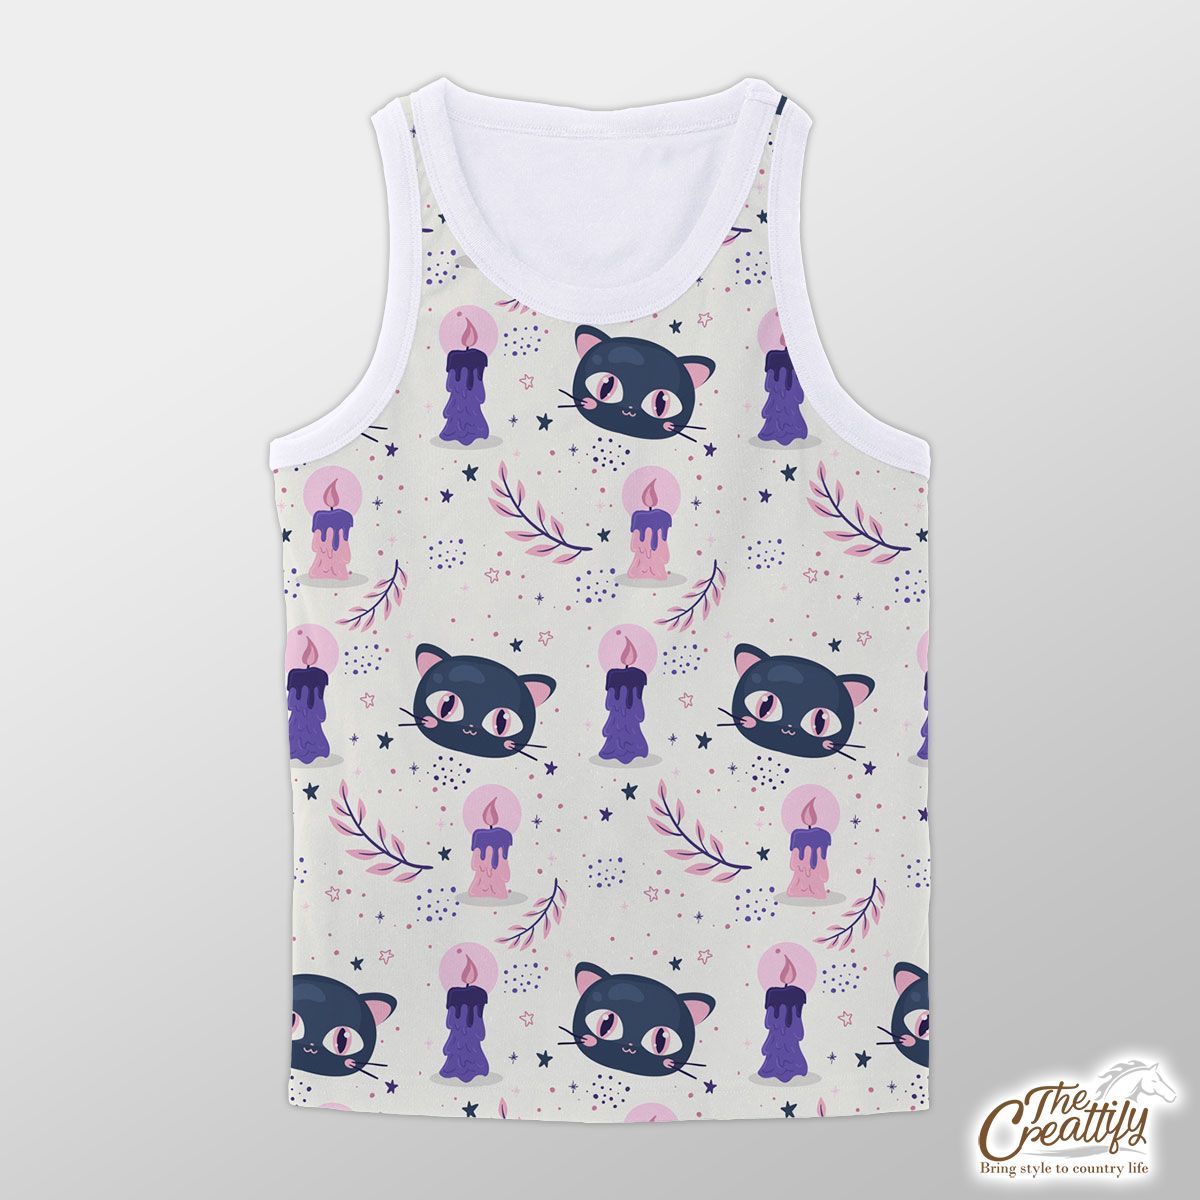 Happy Halloween With Black Cat On The Light Background Unisex Tank Top